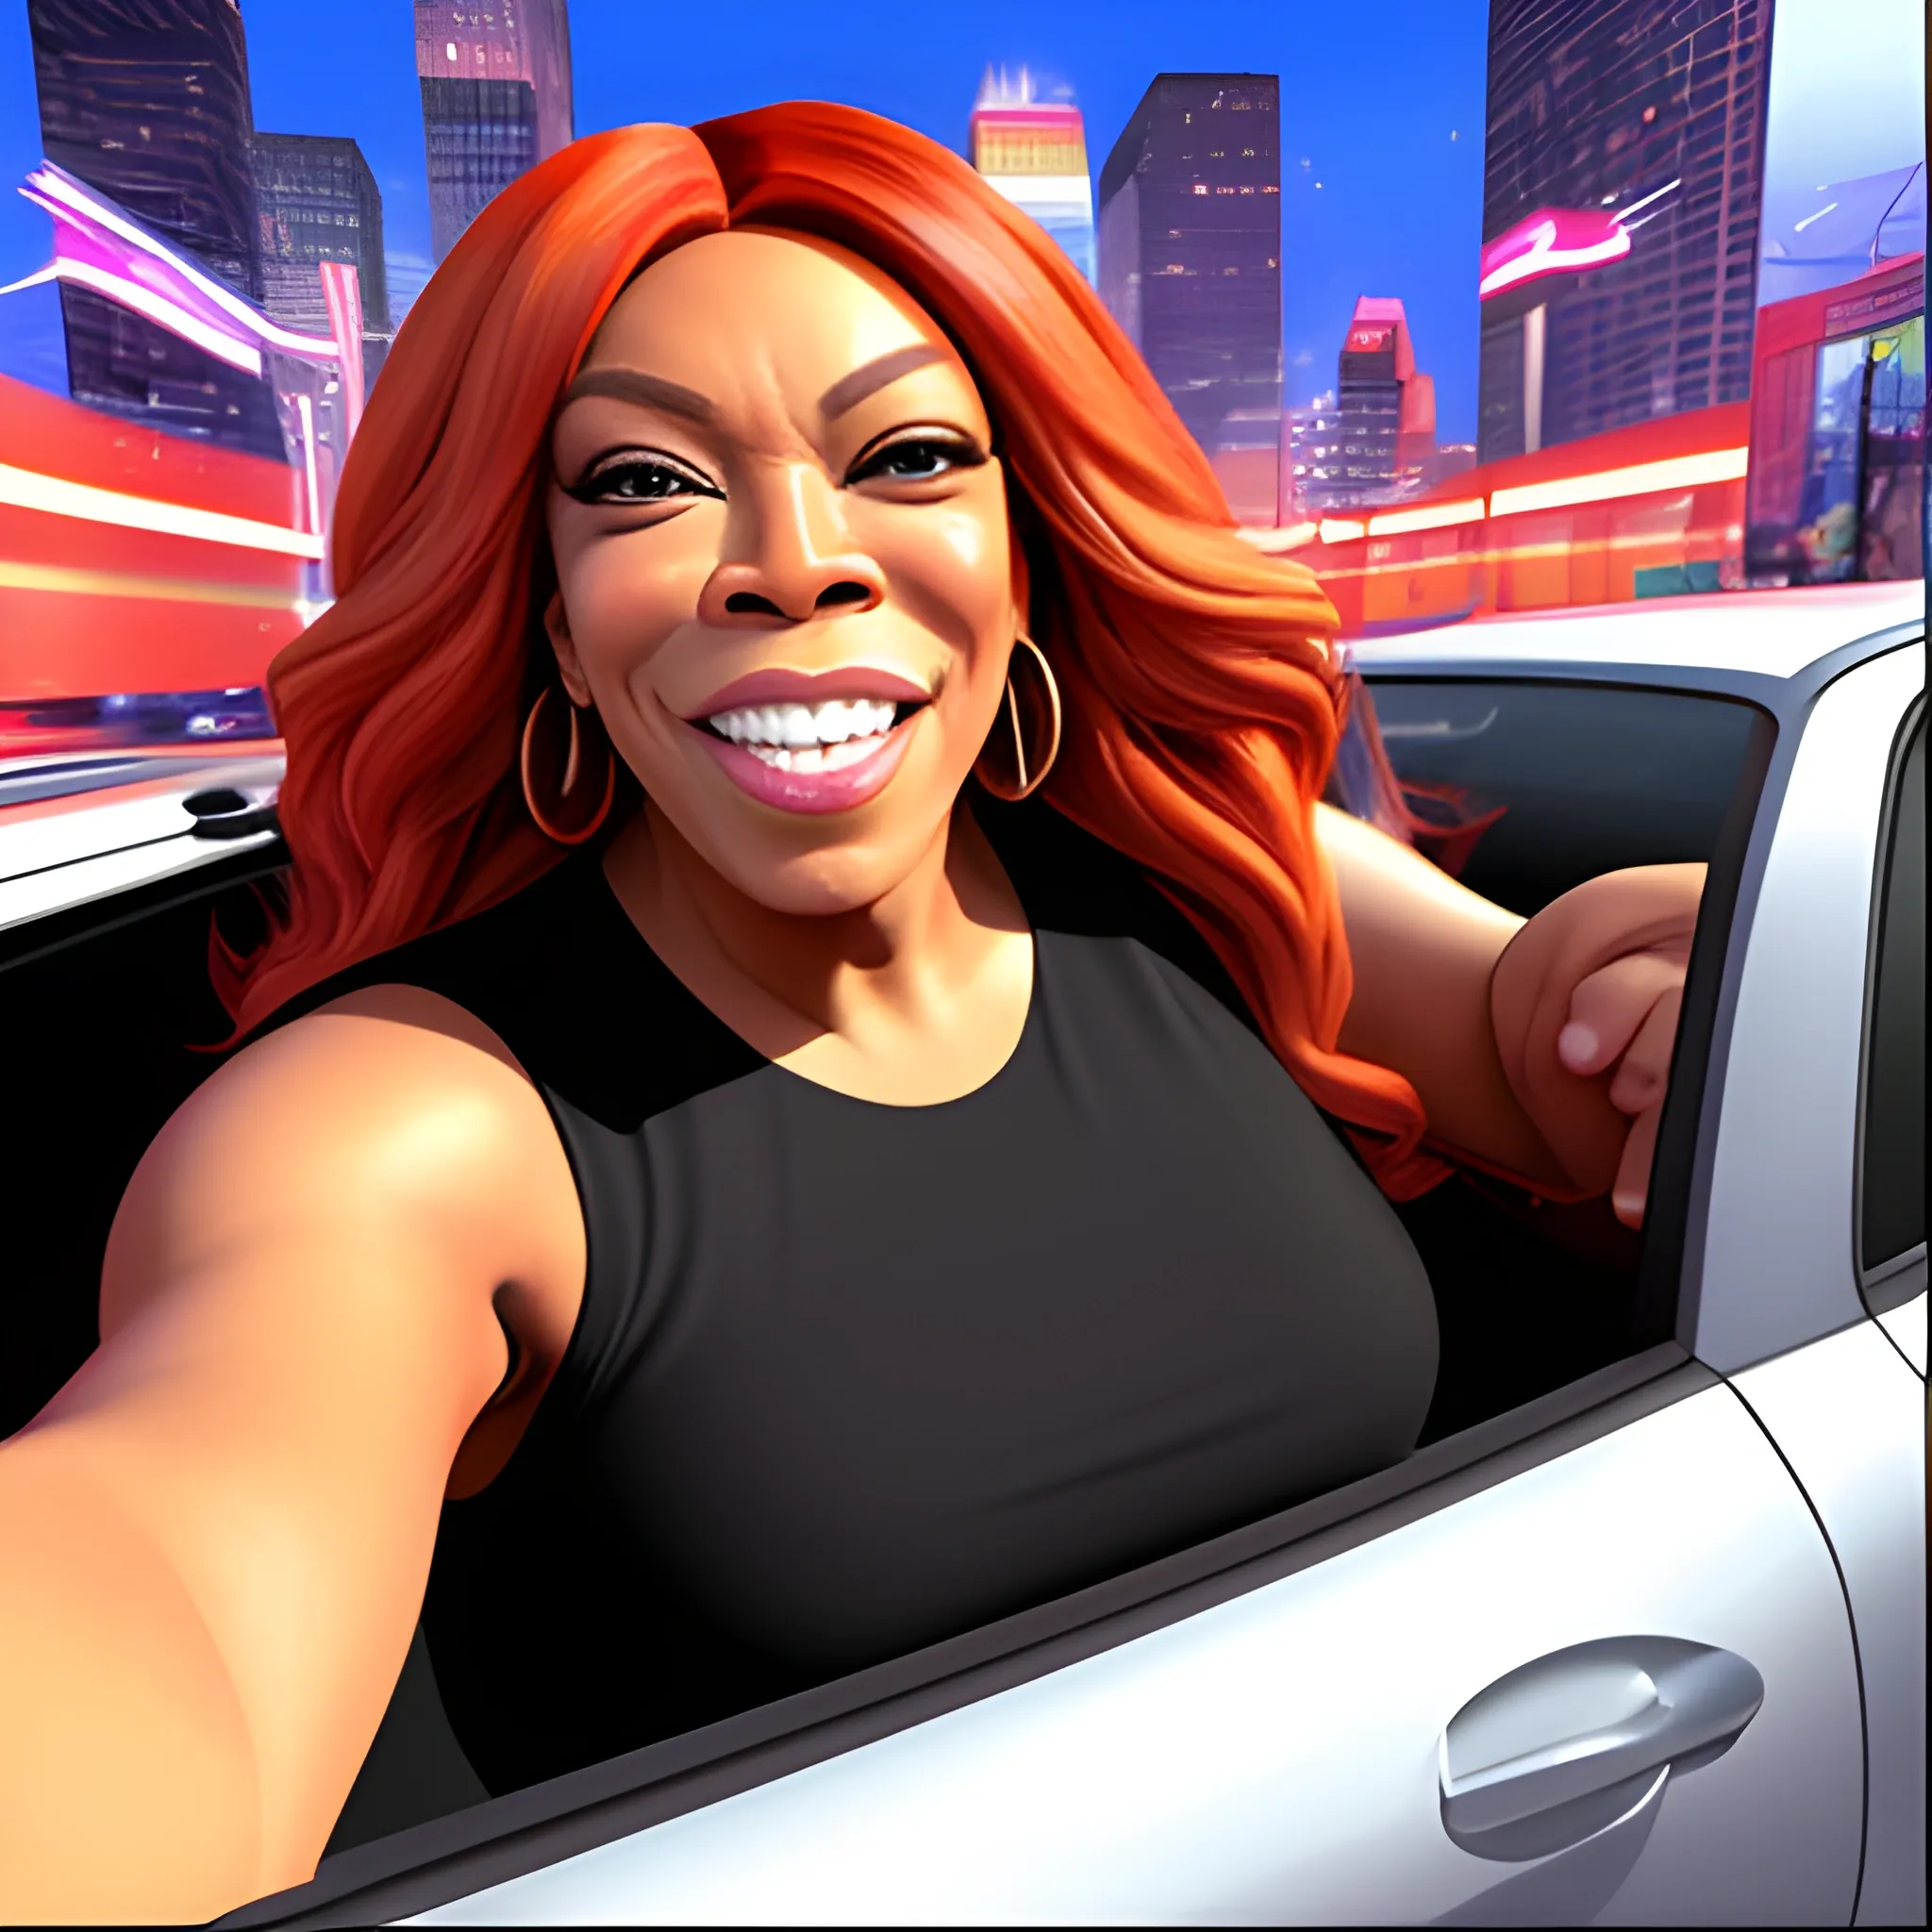 wendy williams taking a selfie as a car is about to run her over, 3D